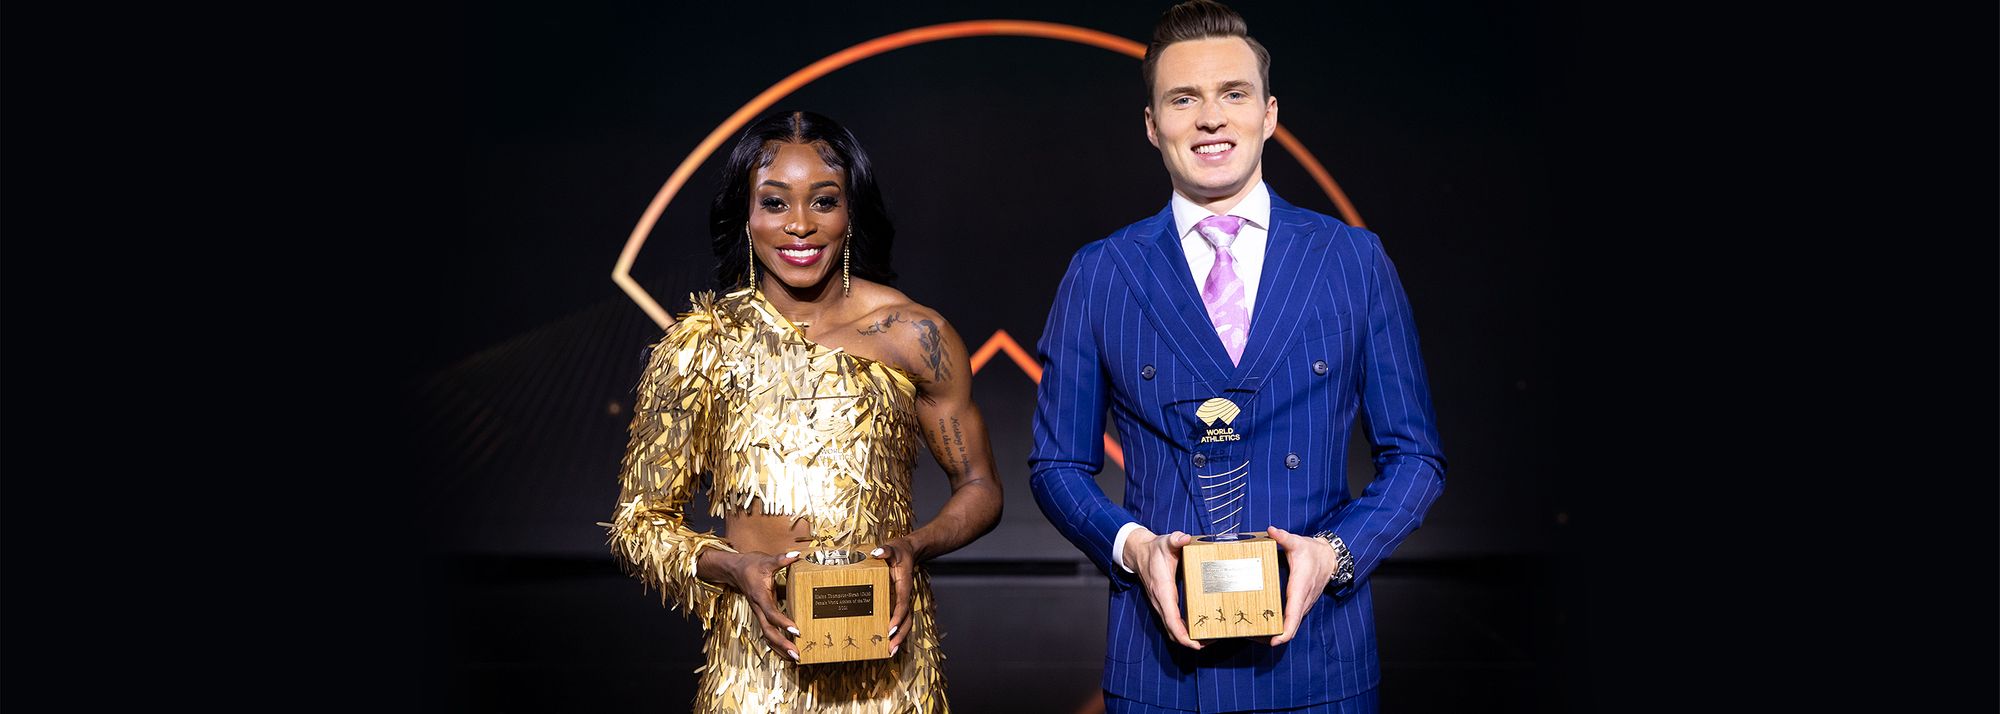 Olympic champions Elaine Thompson-Herah of Jamaica and Karsten Warholm of Norway have been named the World Athletes of the Year